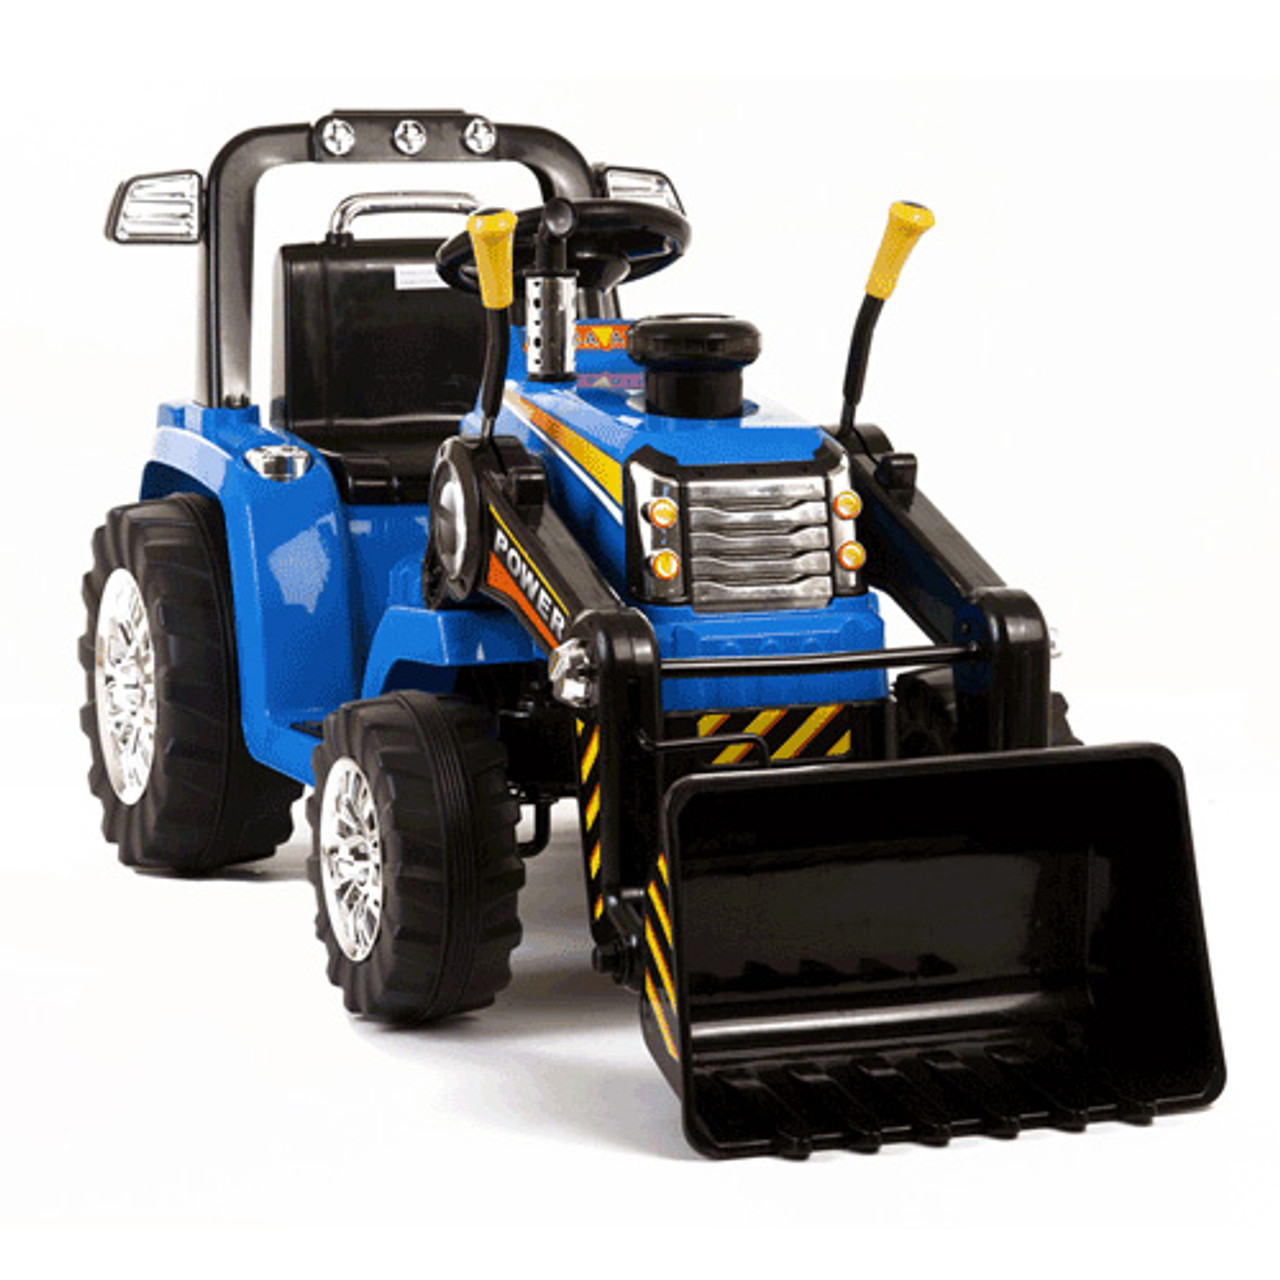 Kids Blue 12v Ride On Digger Tractor with Sounds & Front Scoop